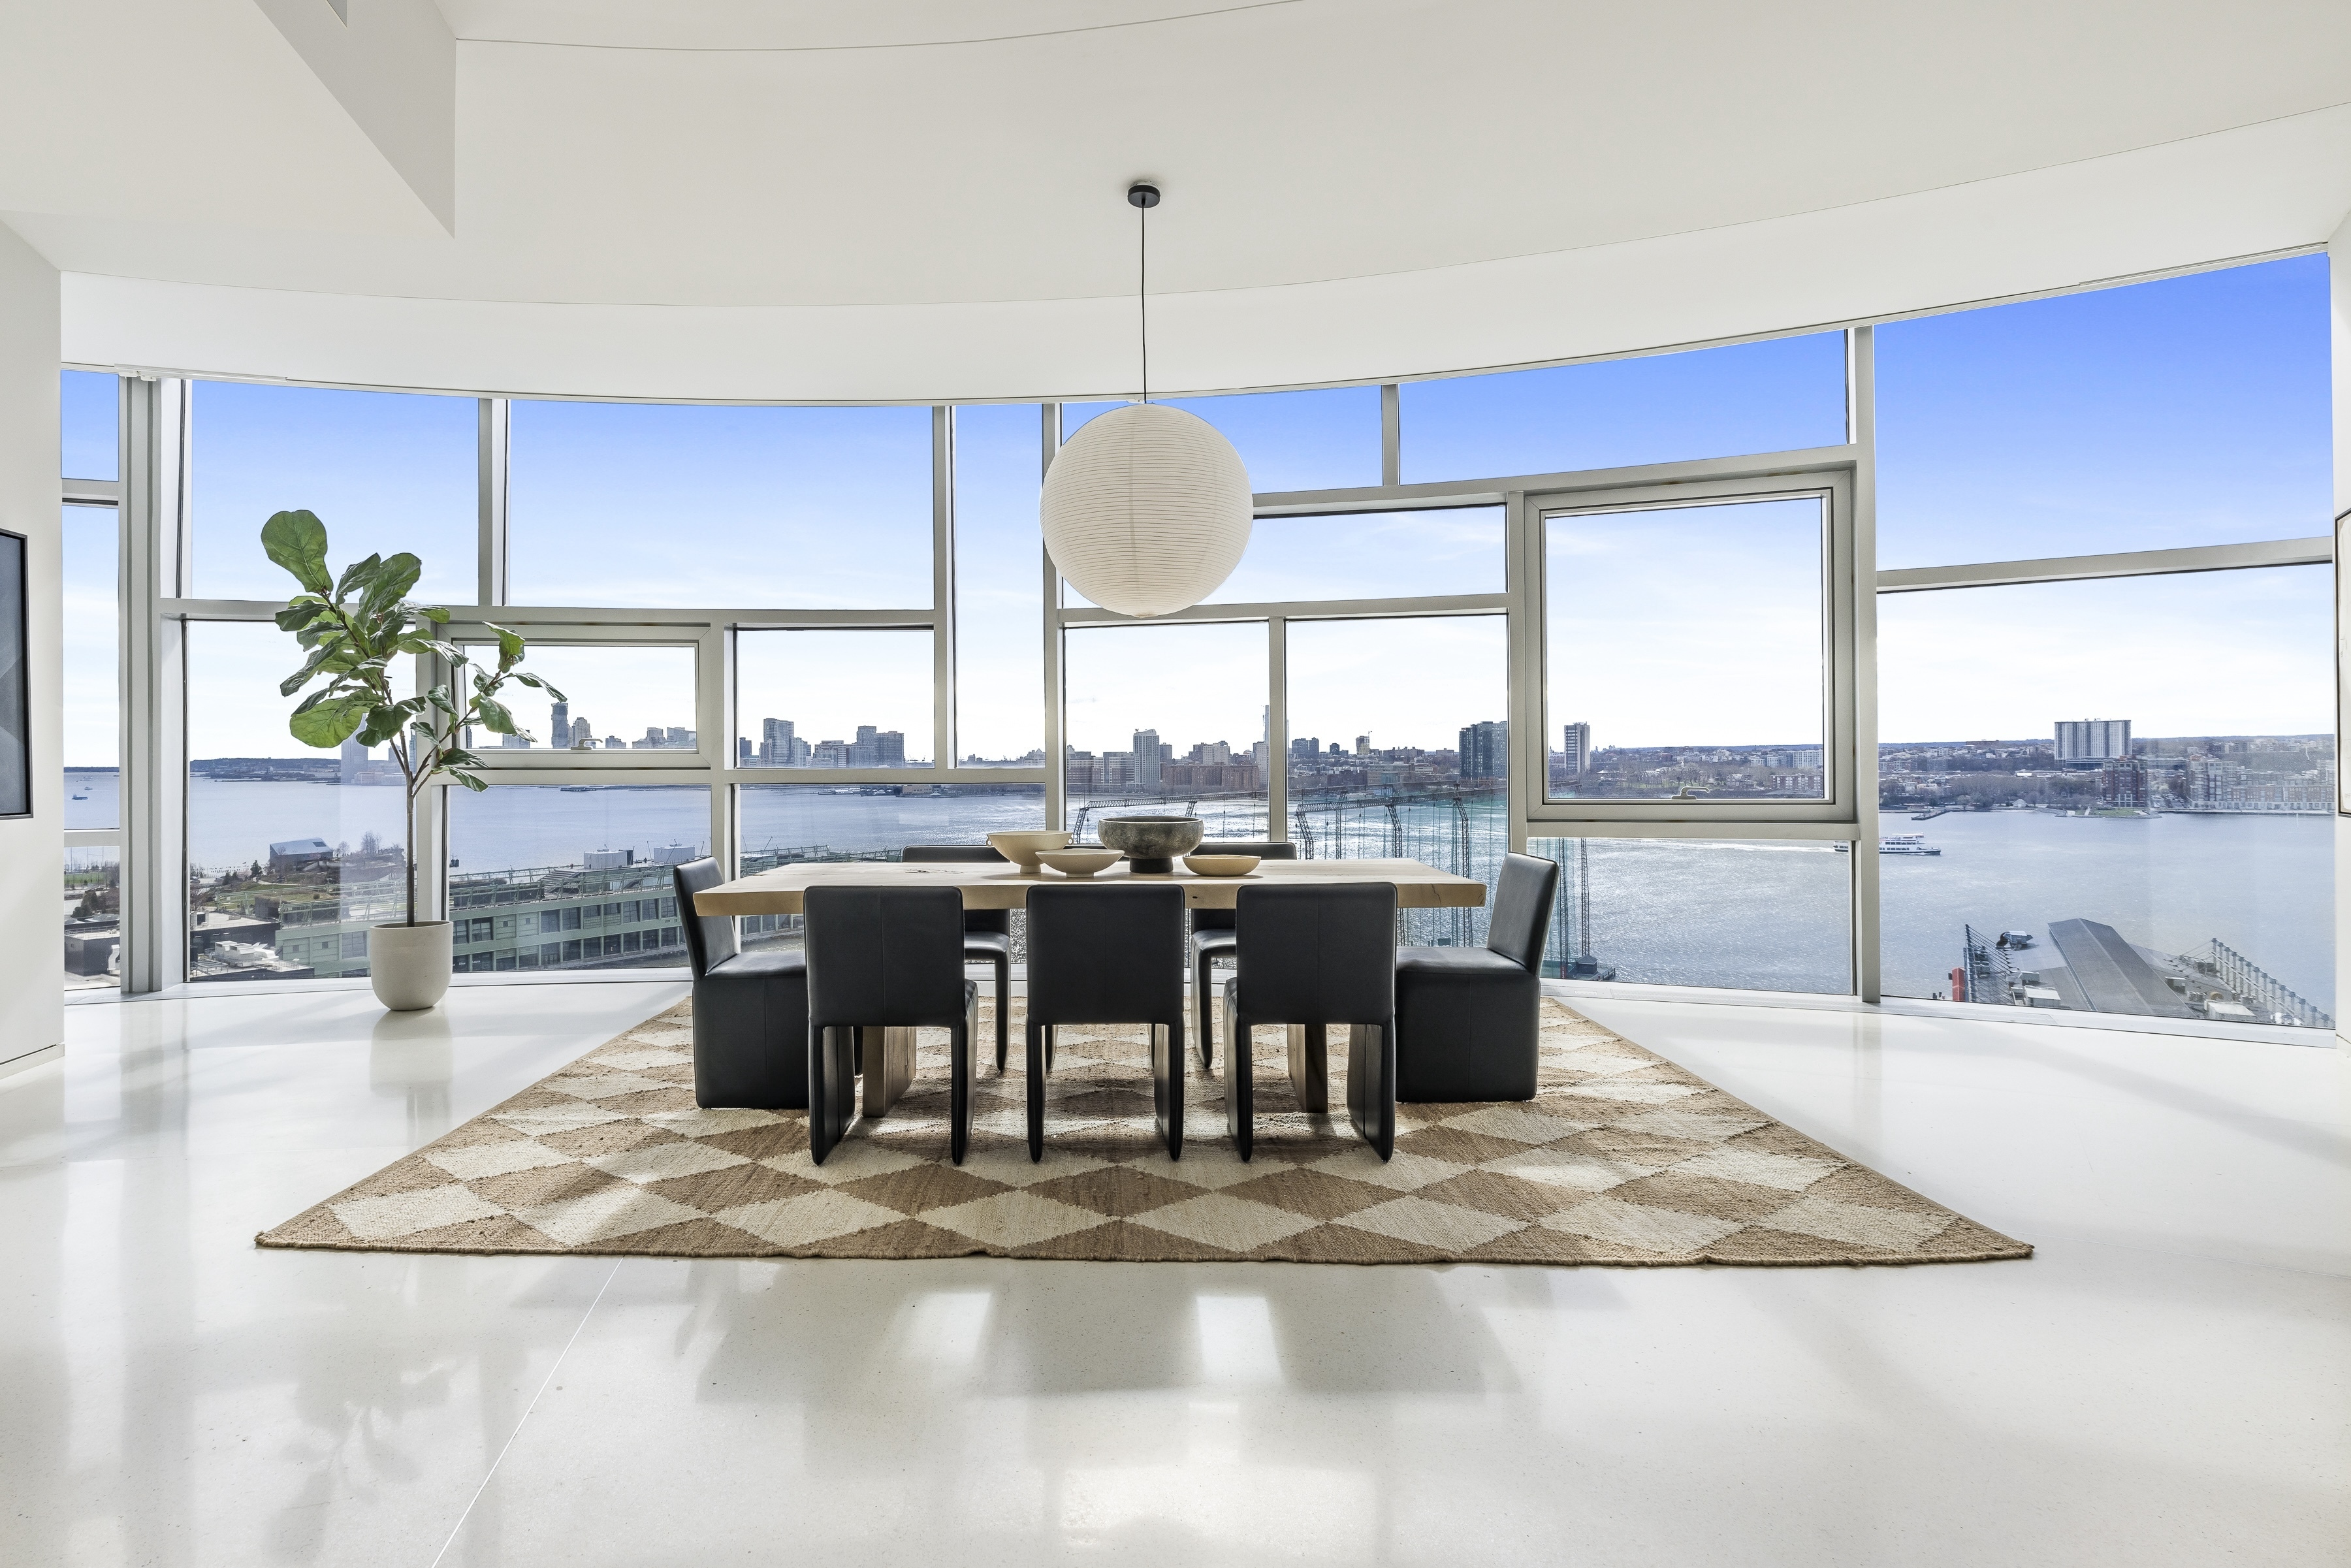 100 11th Avenue 17B/18, Chelsea, Downtown, NYC - 7 Bedrooms  
6.5 Bathrooms  
17 Rooms - 